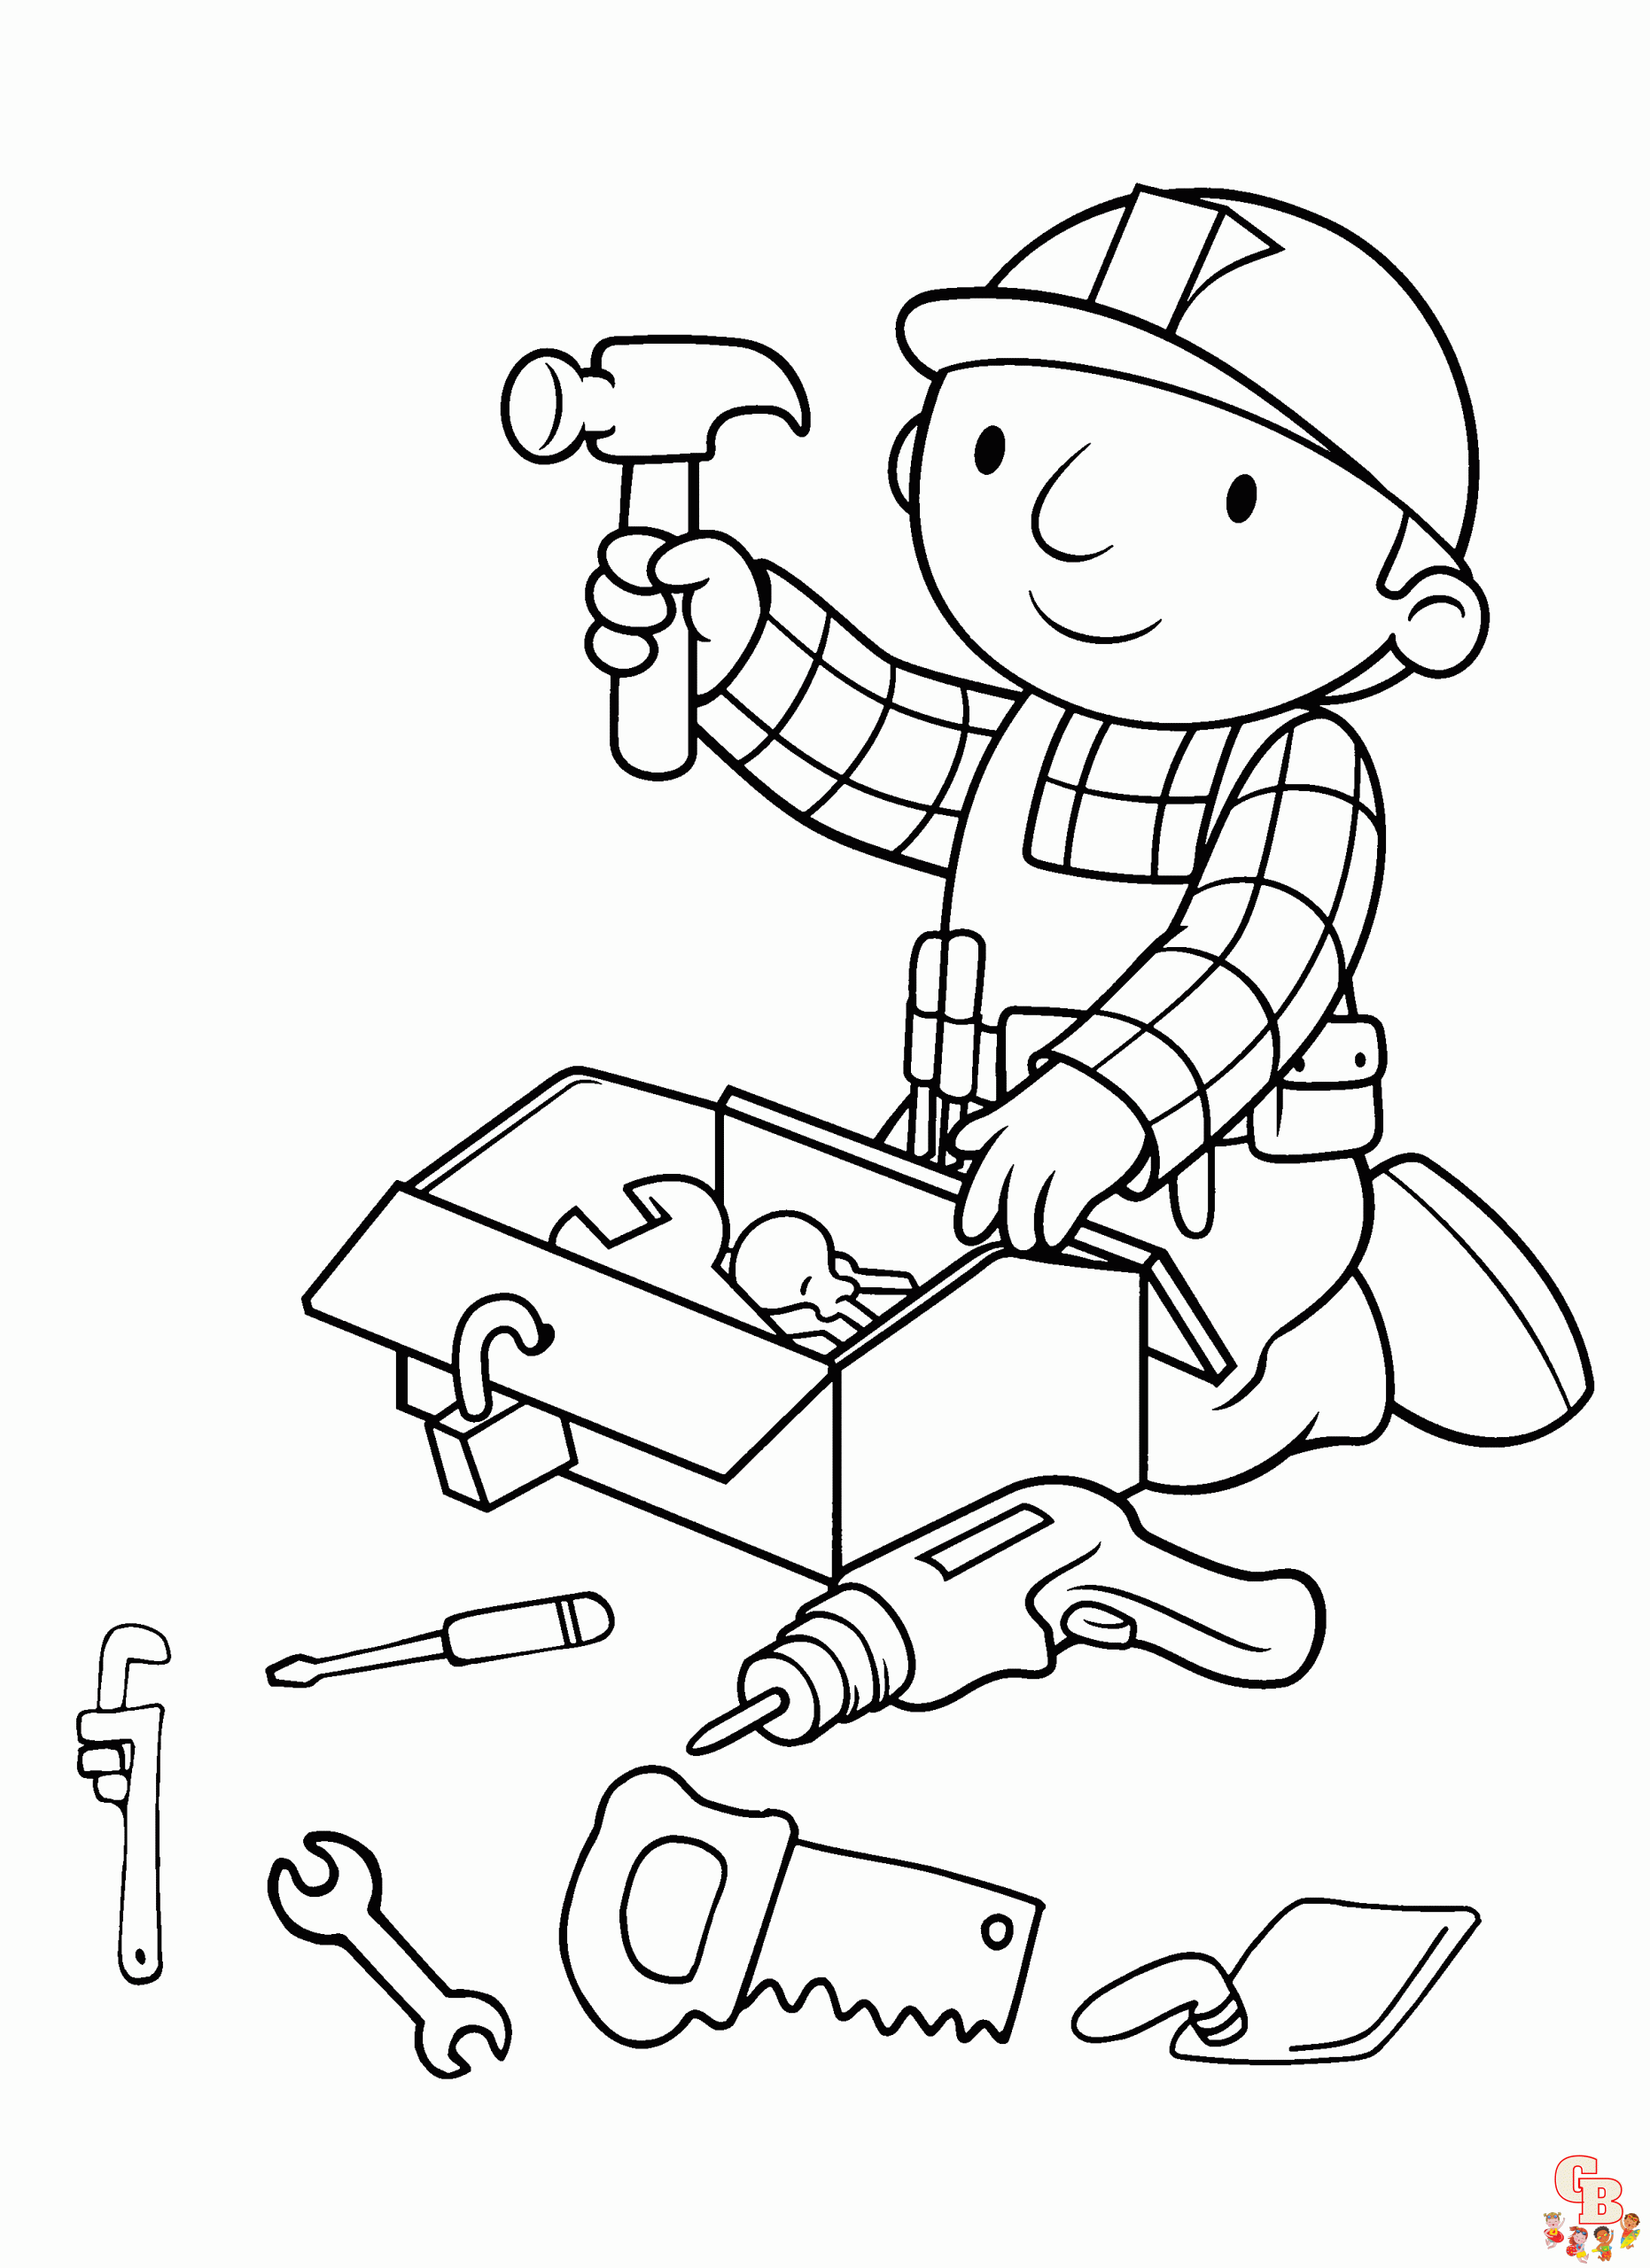 Bob the Builder Coloring Pages 5